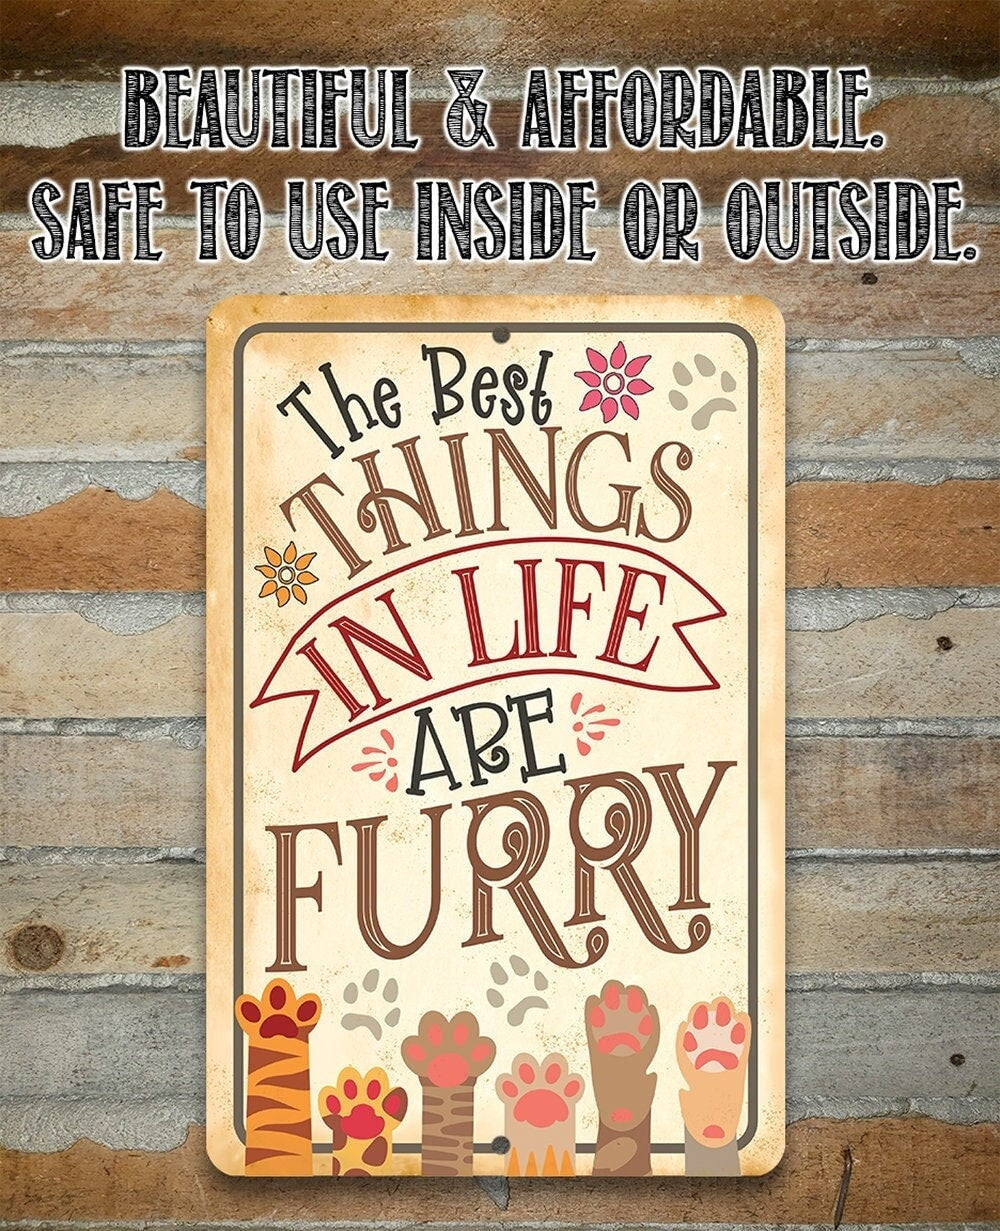 The Best Things In Life Are Furry 8" x 12" or 12" x 18" Aluminum Tin Awesome Metal Poster Lone Star Art 